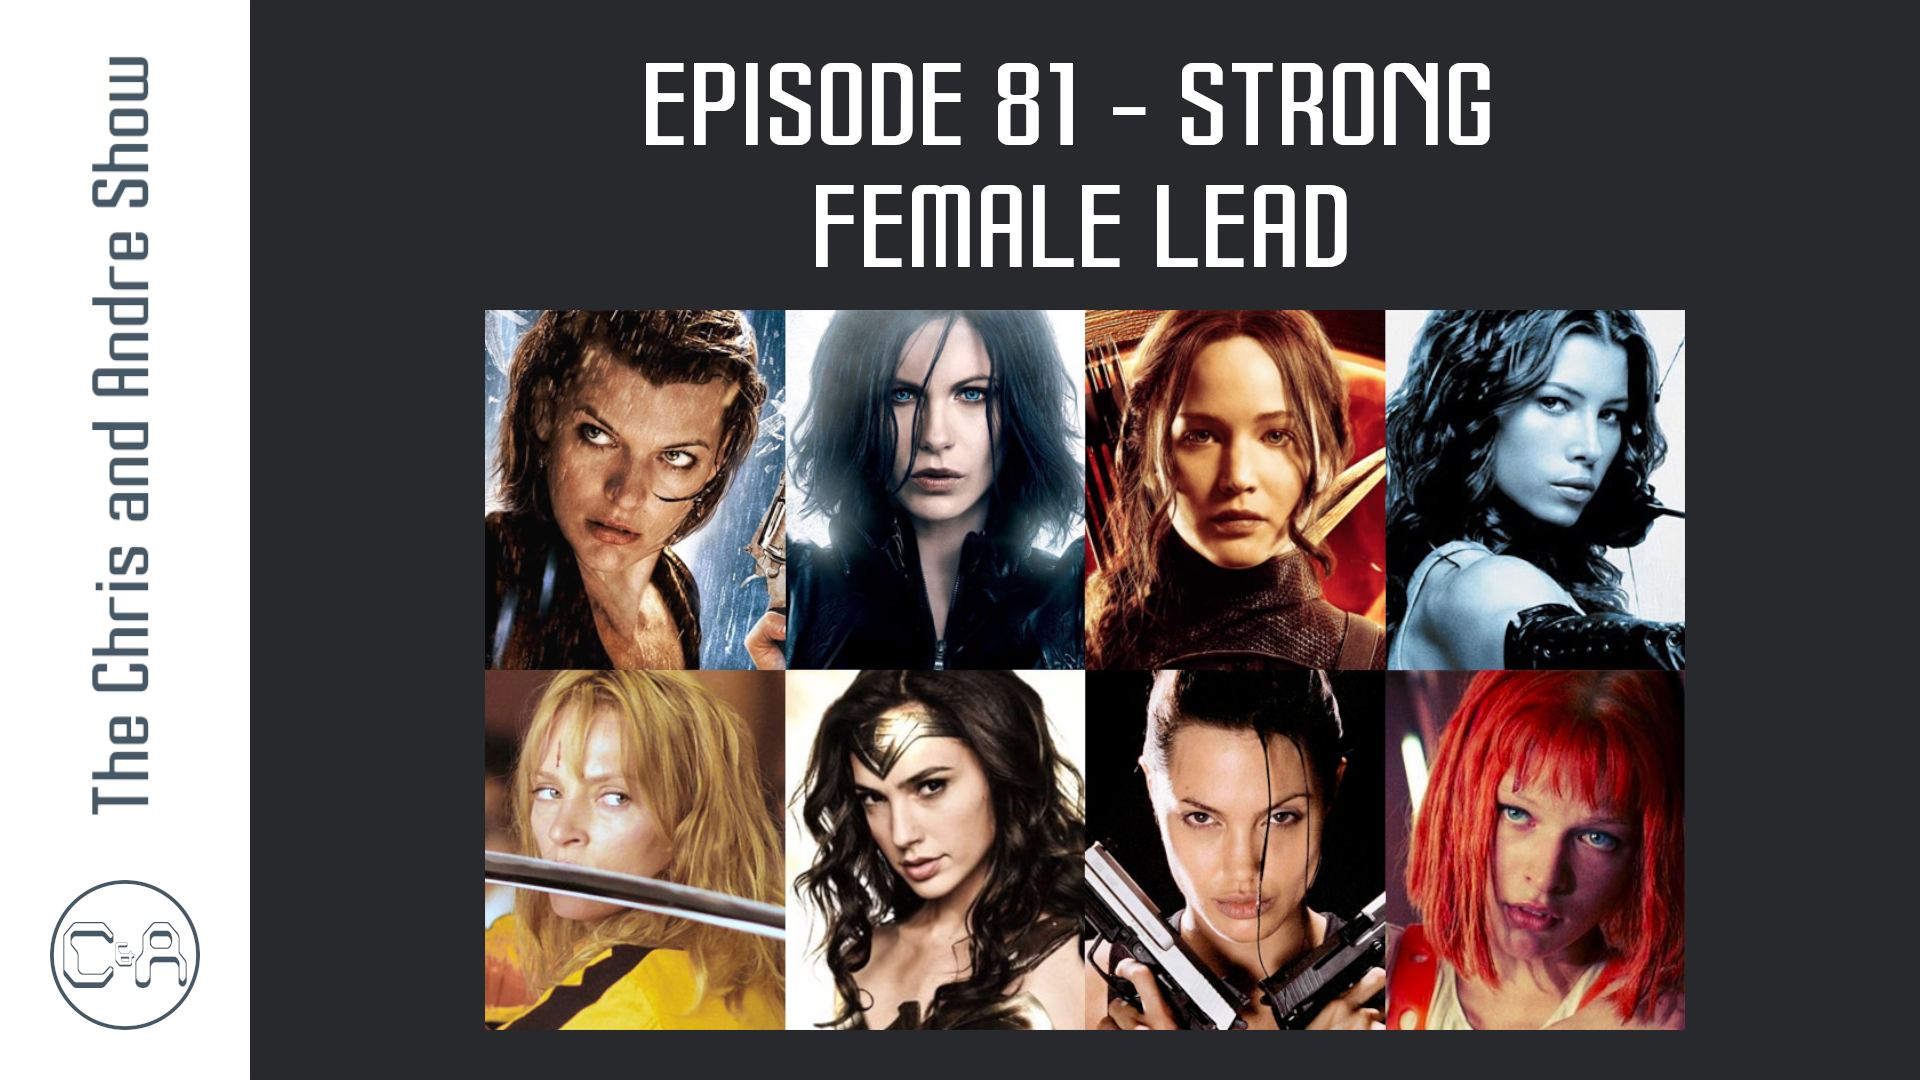 Episode 81 - Strong Female Lead